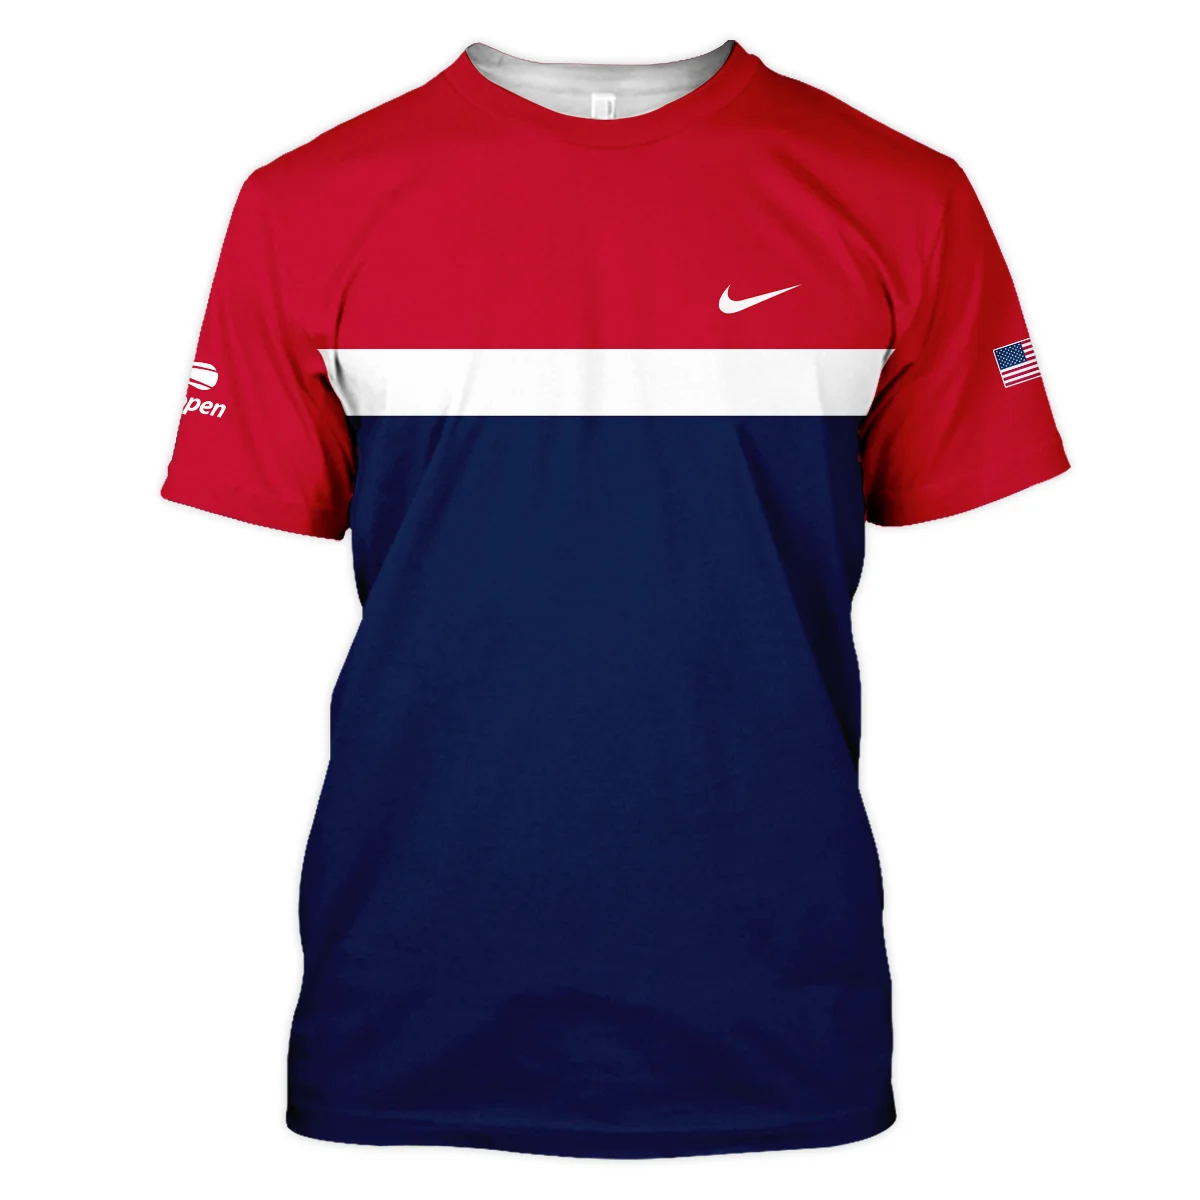 Nike Blue Red White Background US Open Tennis Champions Unisex T-Shirt Style Classic T-Shirt